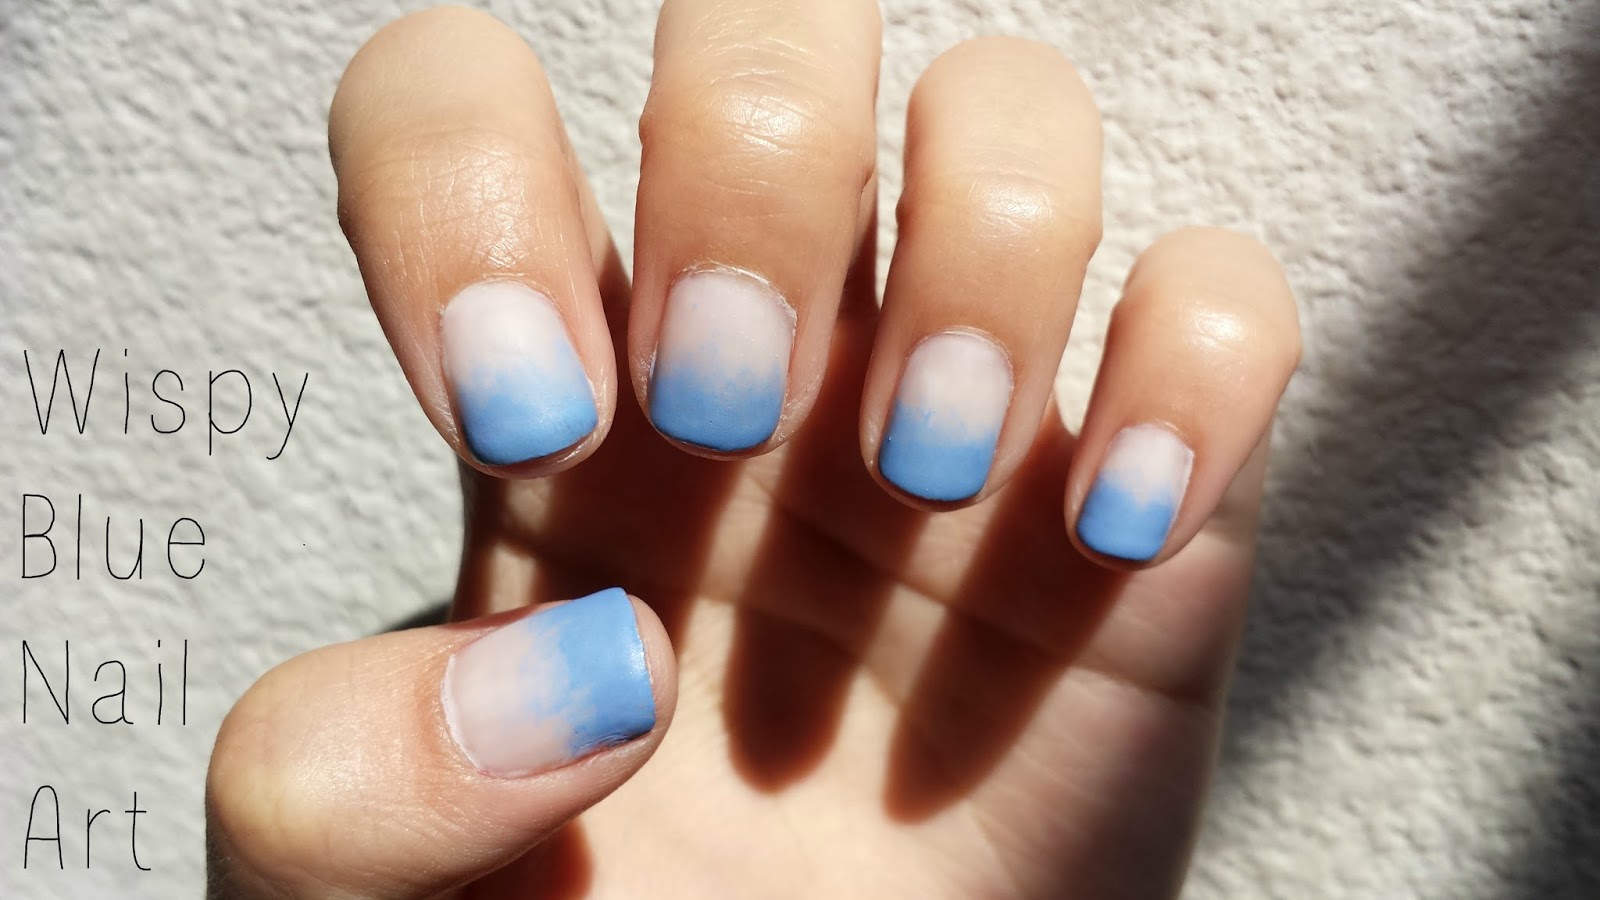 7. "Wispy Nail Designs to Try This Summer" - wide 7